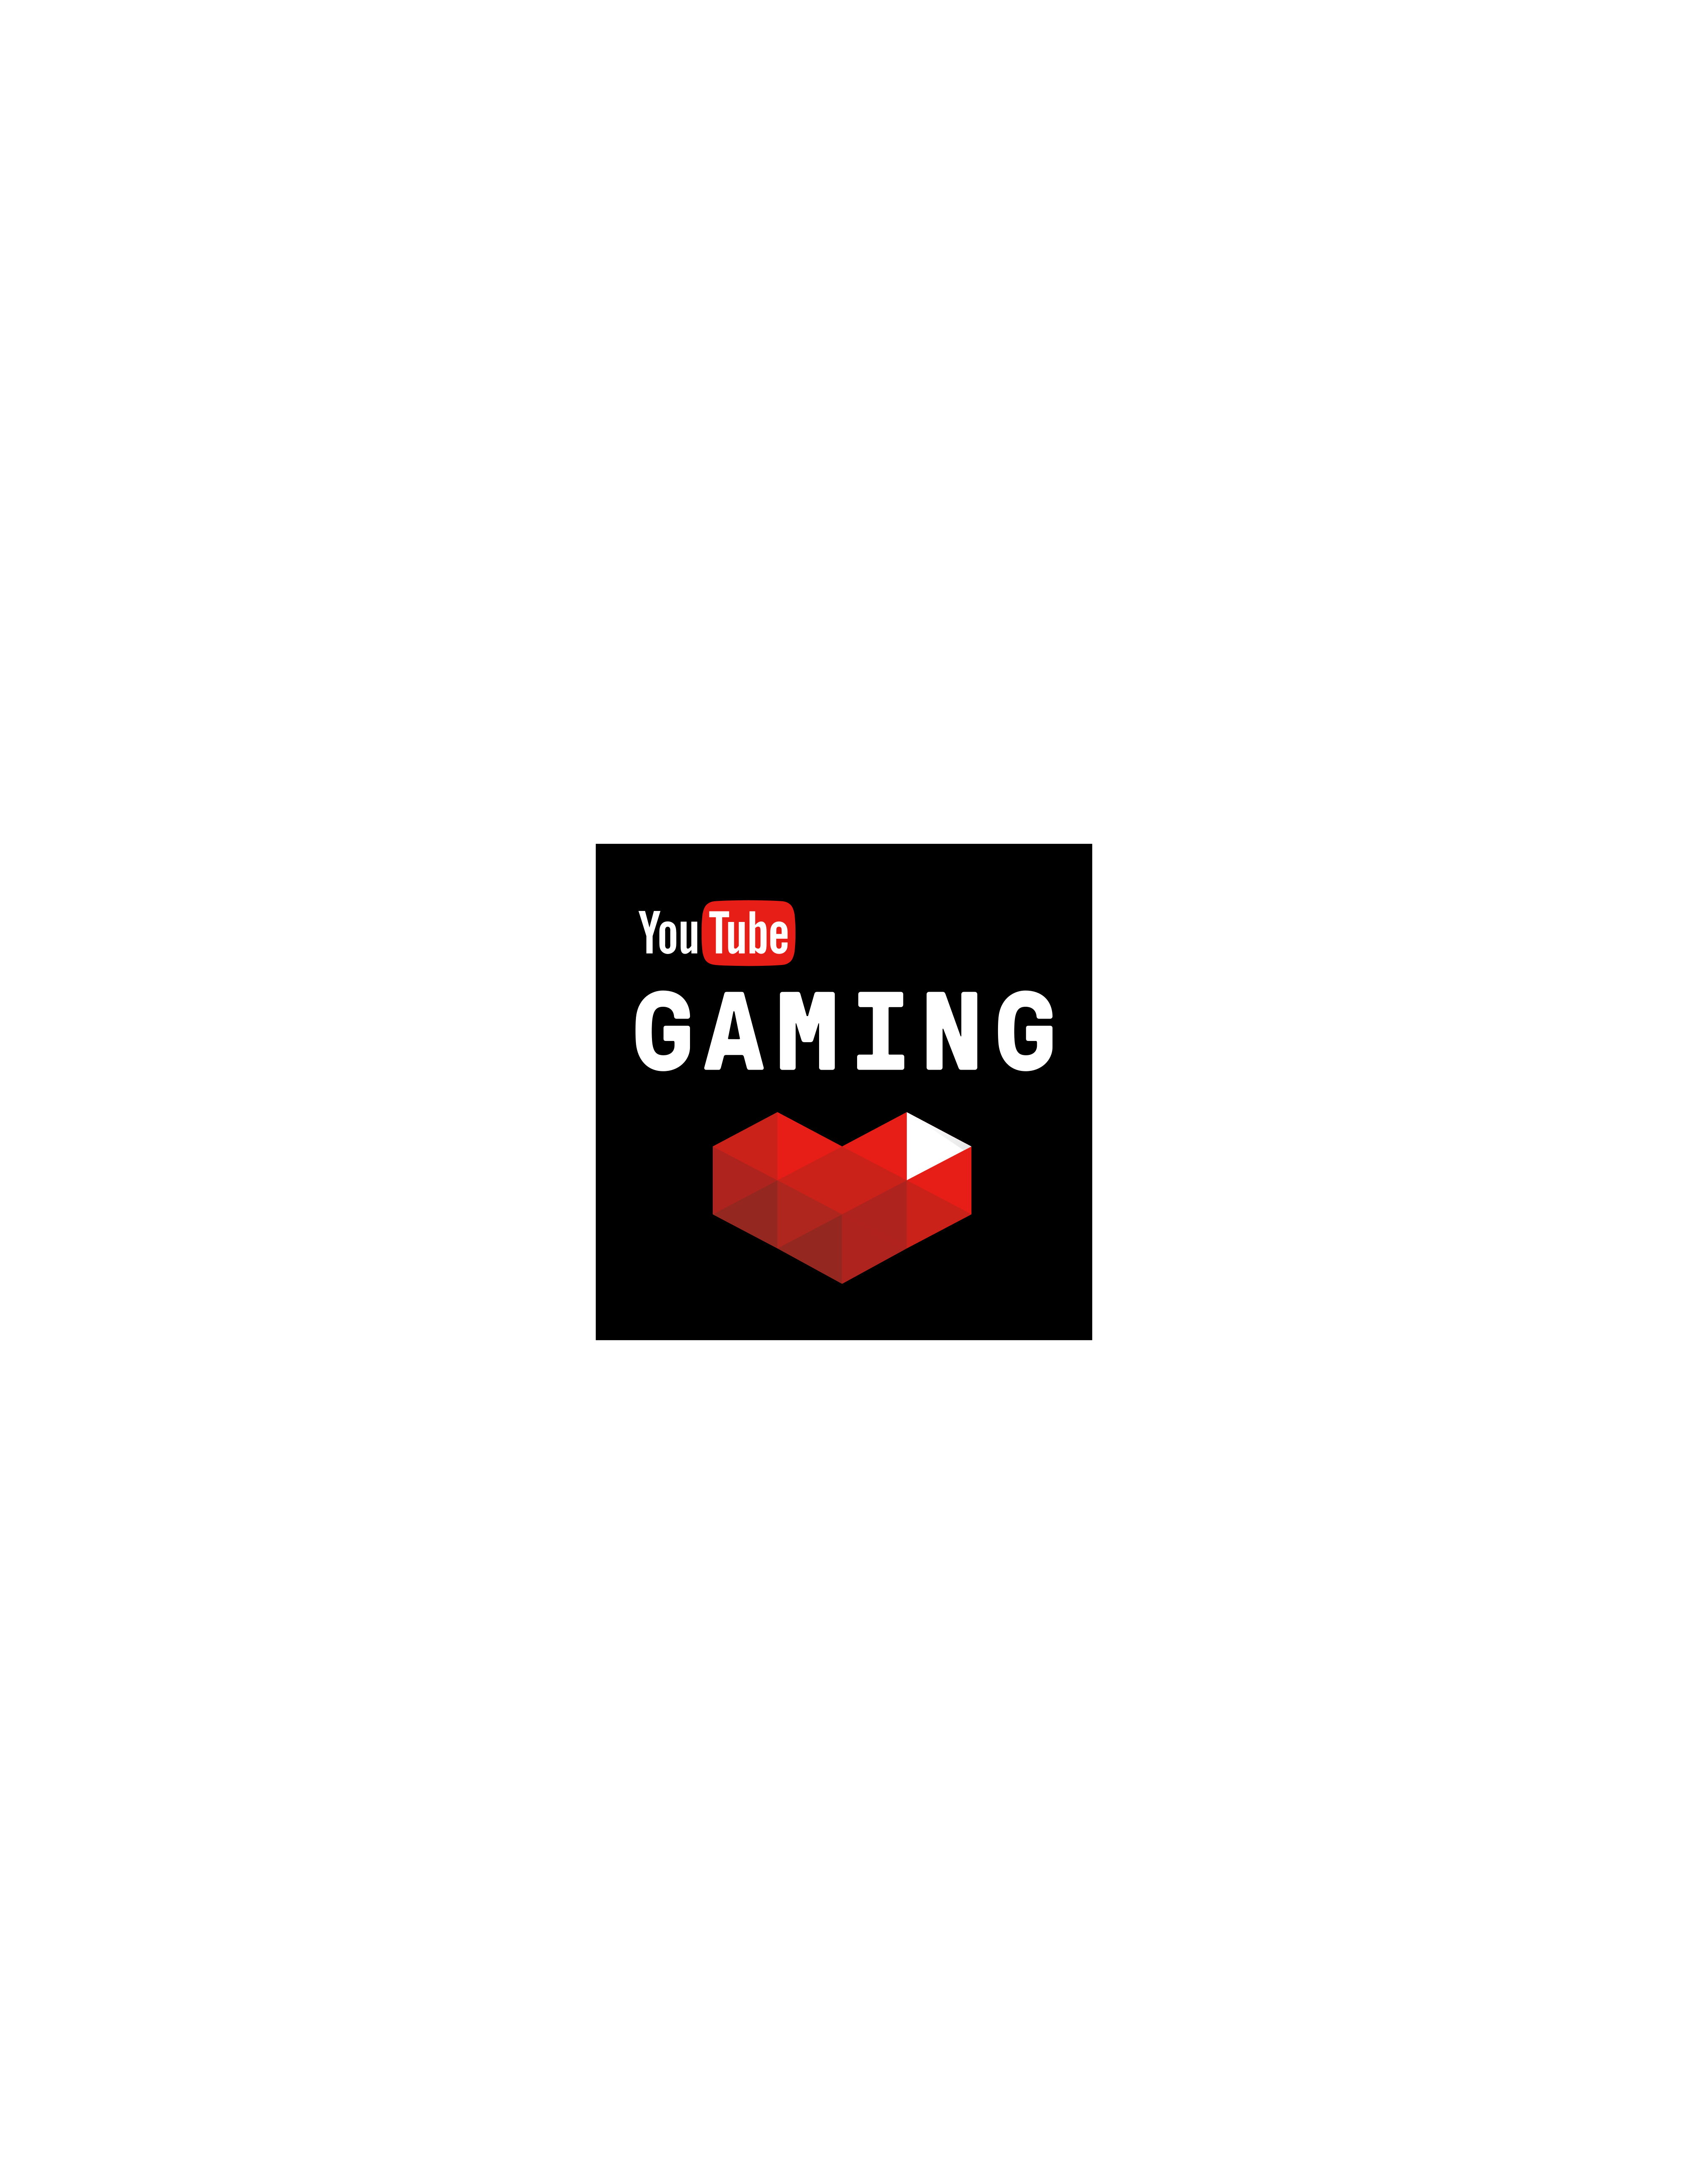 A Black Background With A Red Heart And White Text